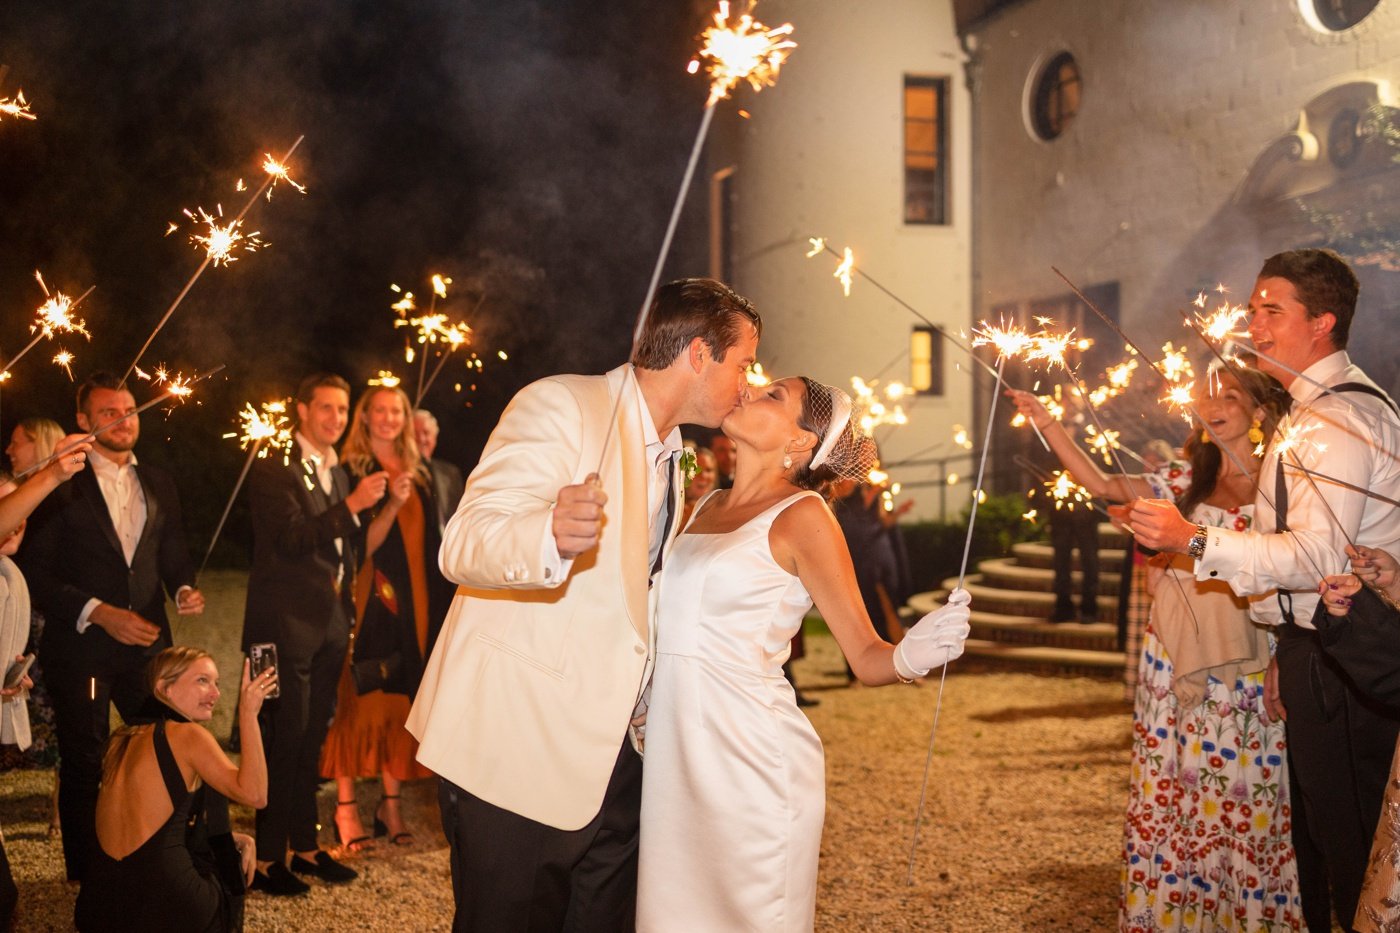 Bride and groom kissing while holding sparklers at their wedding send-off